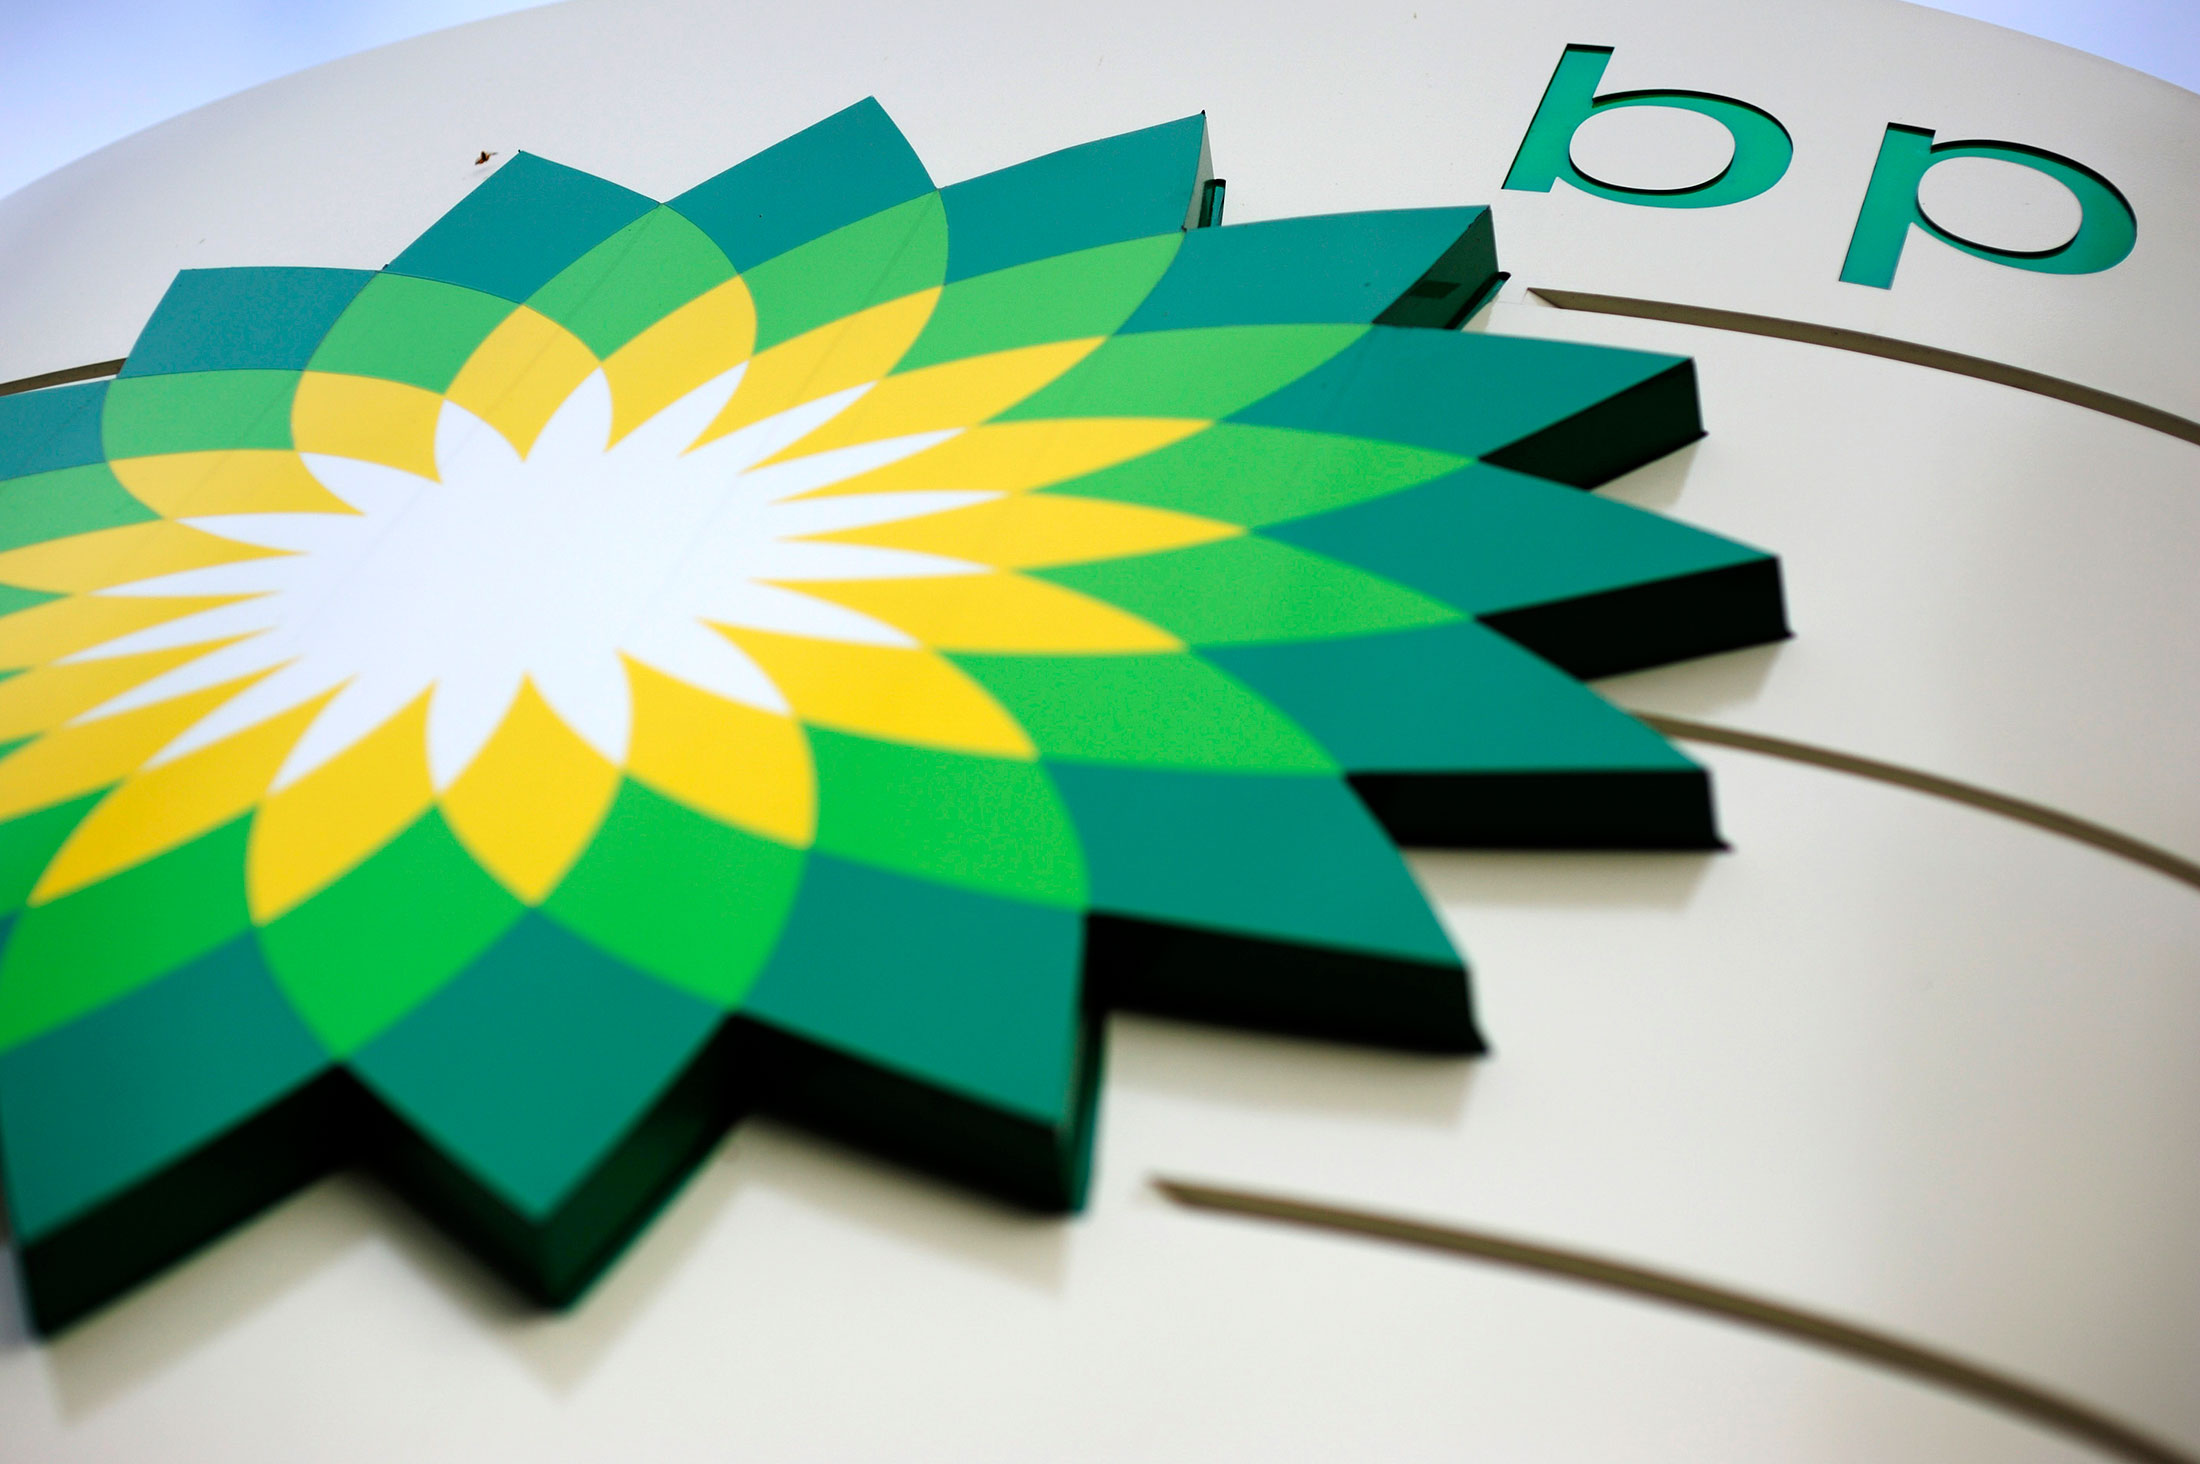 The BP Plc company logo sits at a fuel station in London, U.K., on Tuesday, Oct. 27, 2009. BP Plc, Europe’s second-largest oil company, posted third-quarter earnings that beat analyst estimates and raised its cost-cutting target for the year, sending the shares to a 16-month high.
